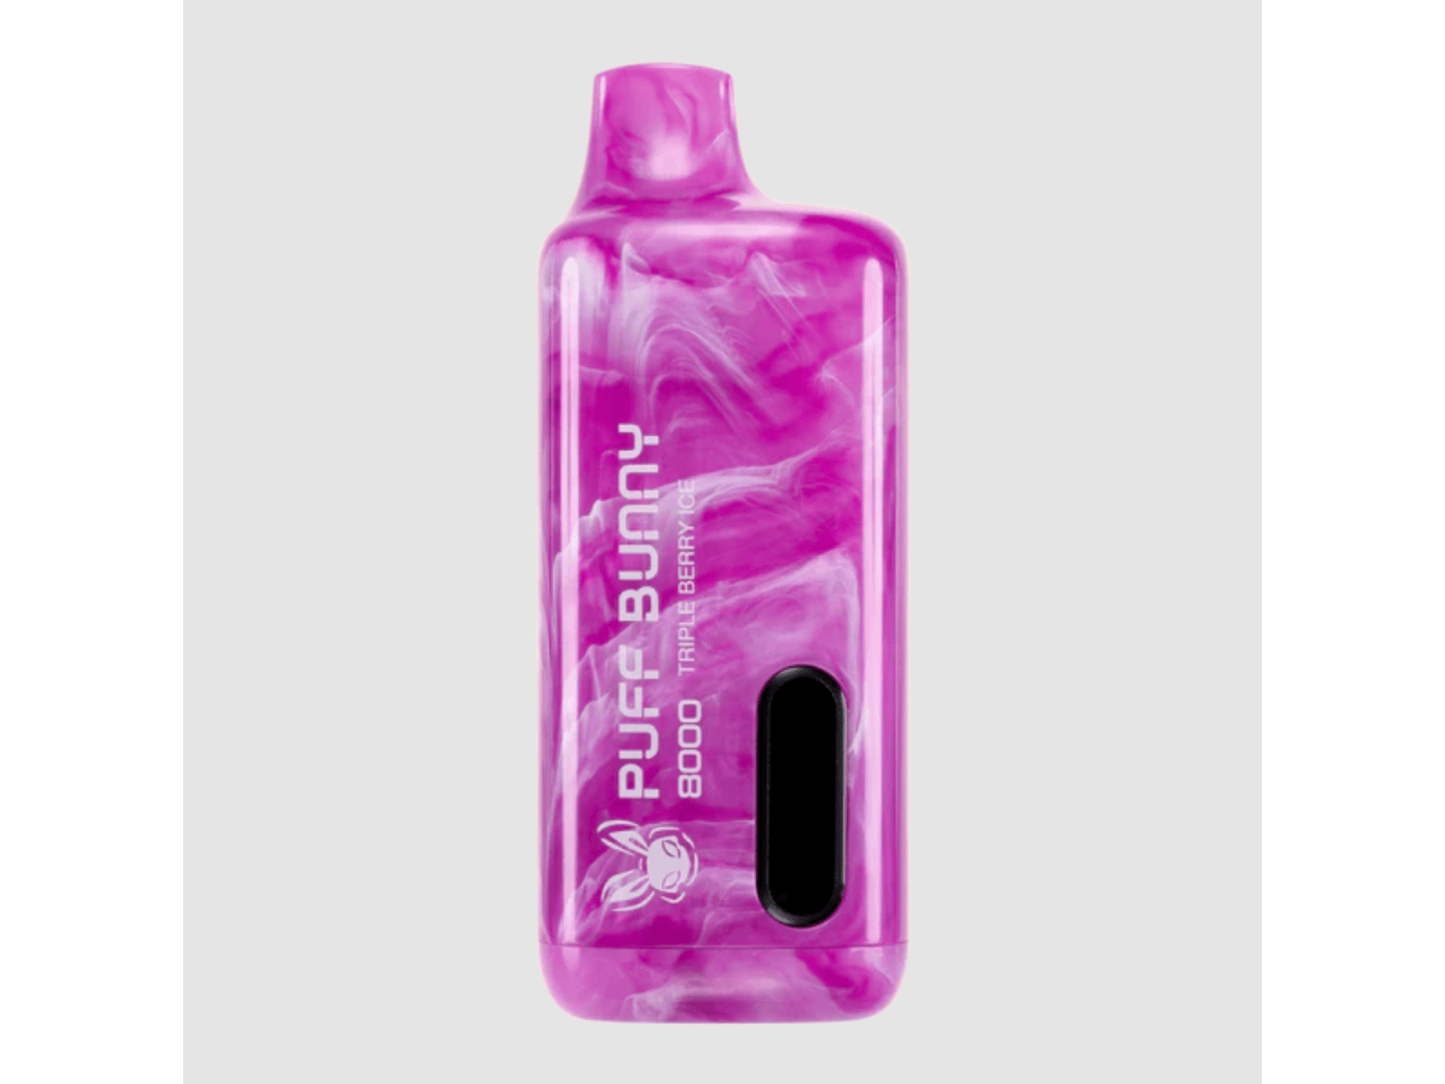 Puff Bunny Triple Berry Ice flavored disposable vape device.